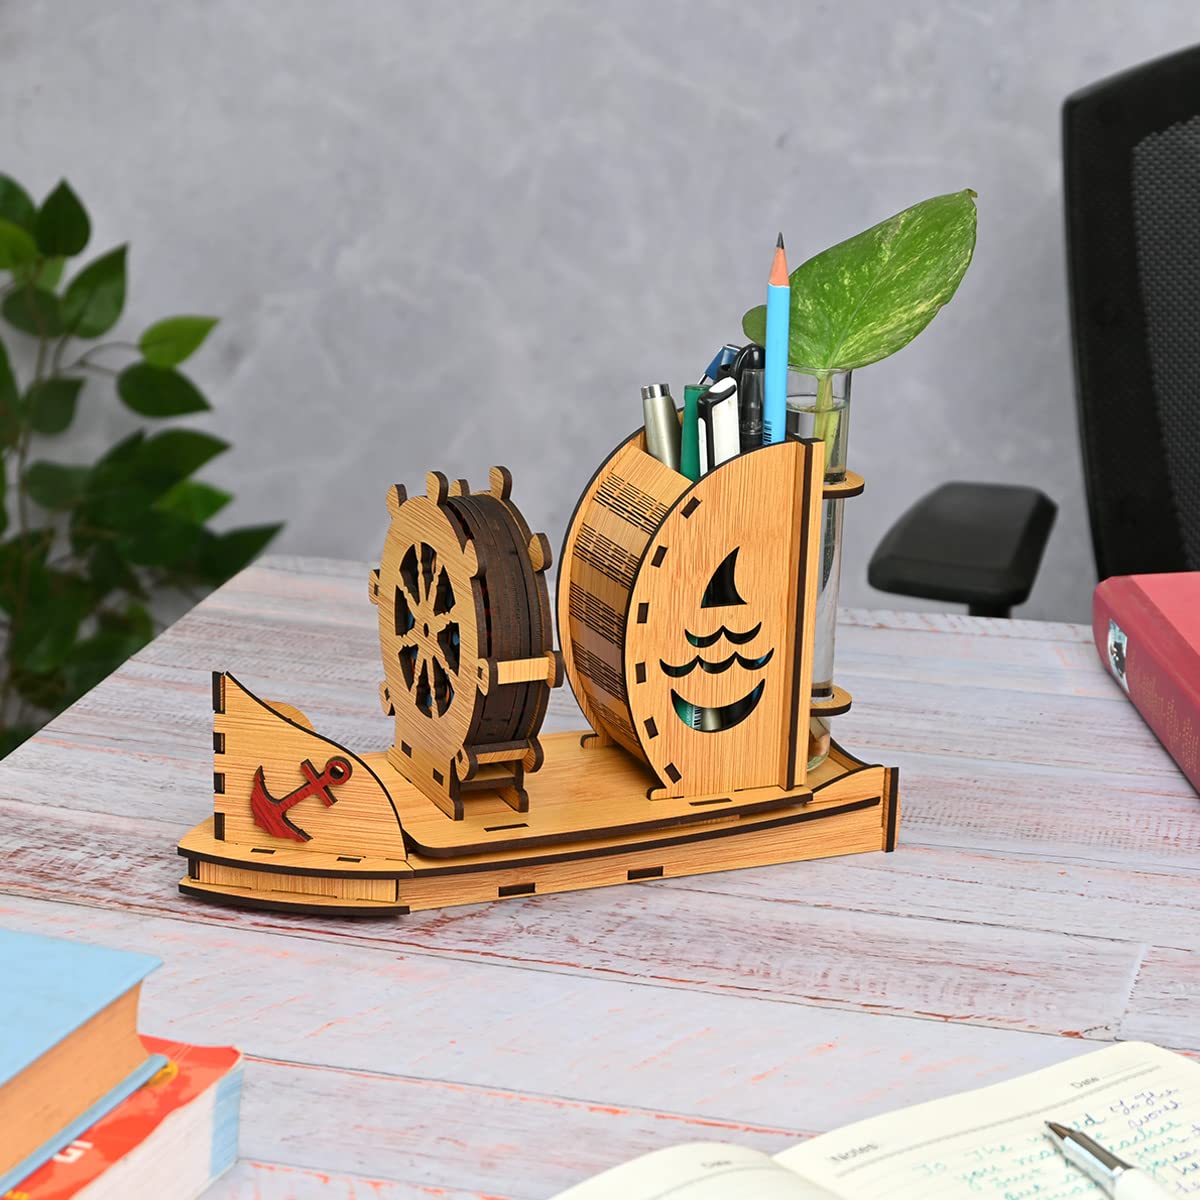 Boat Shape Coaster Stand With Set of 6 Coaster & Cute Test Tube Planter, Good for Dining Table Decorative Items and Office Desk Accessories